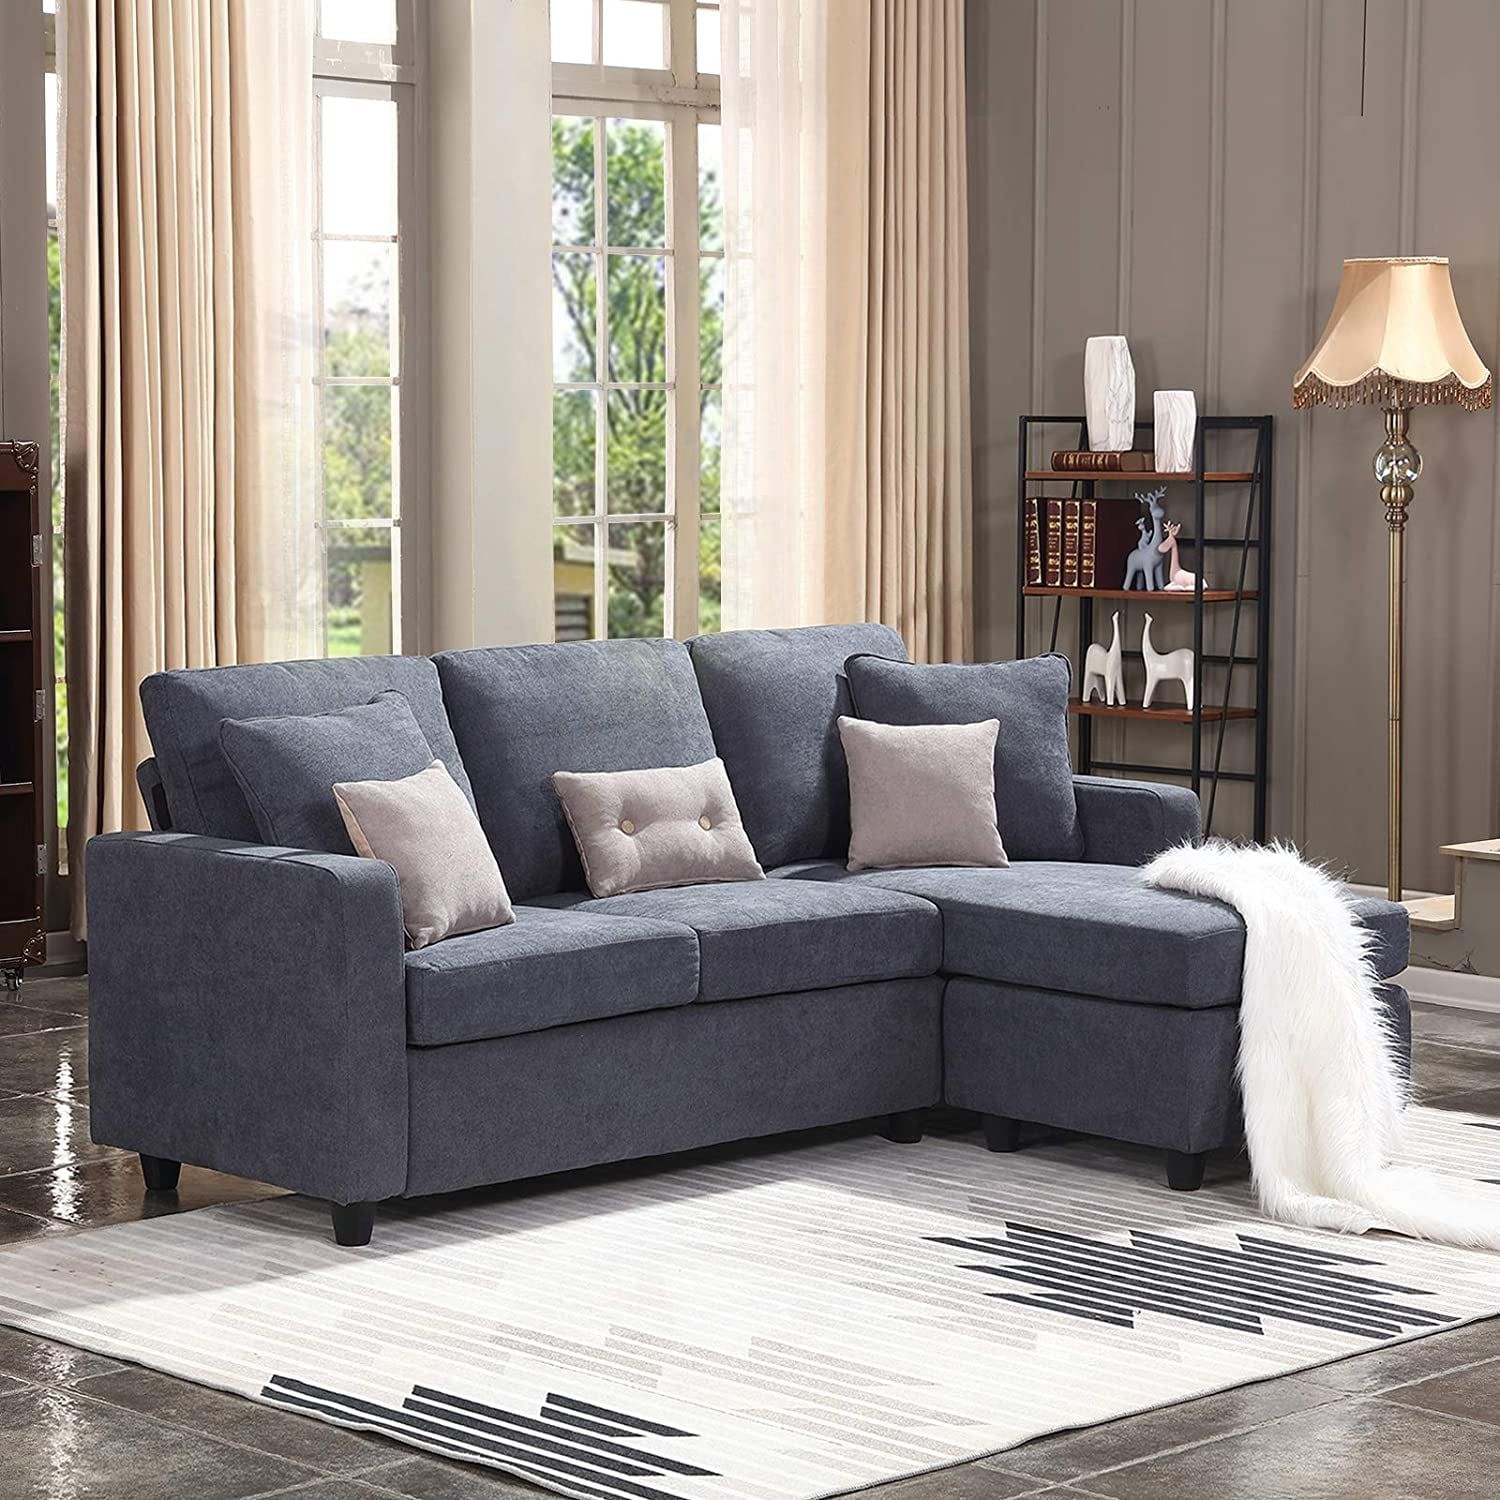 A Bestselling Sofa: Honbay Convertible Sectional Couch | The Most Popular  Home Products Customers Are Buying On Amazon | Popsugar Home Photo 7 Within Convertible Sectional Sofa Couches (View 13 of 15)